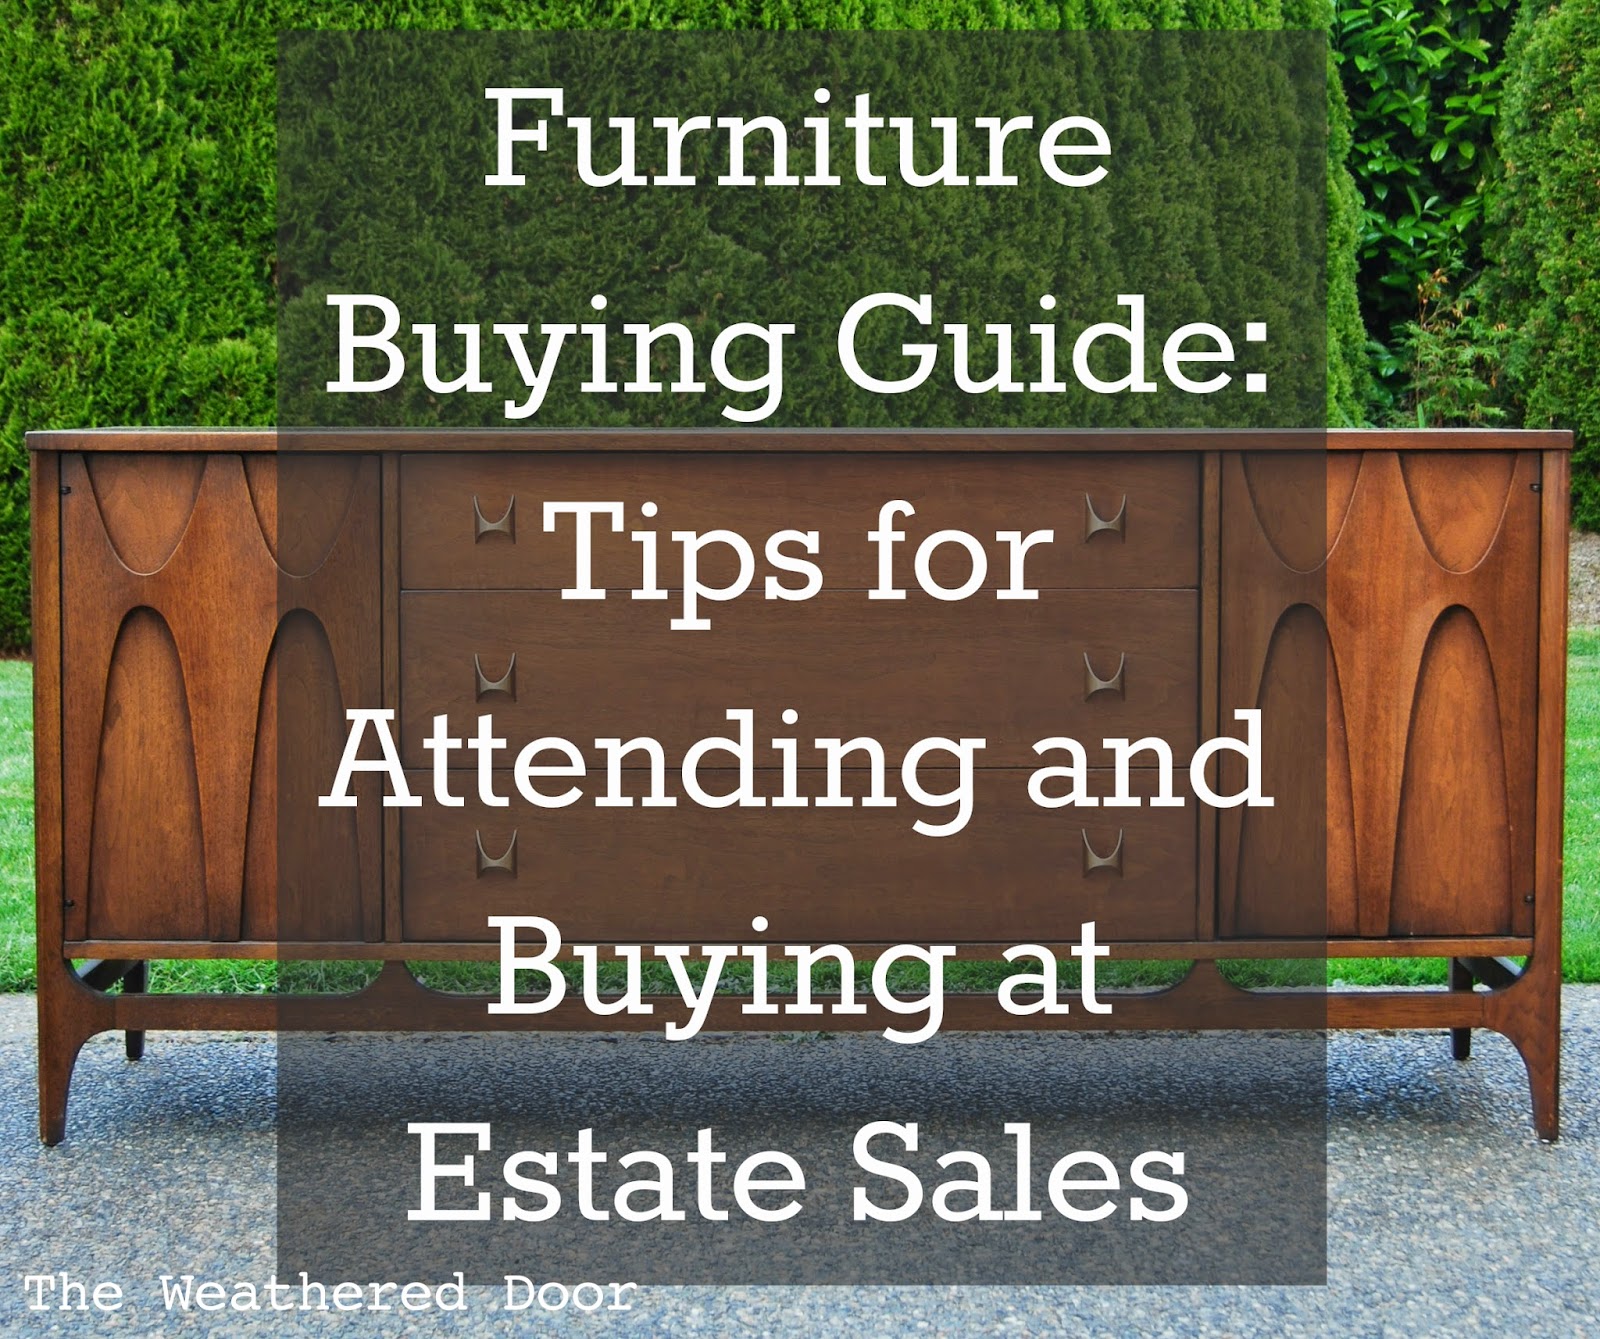 Furniture Buying Guide: Tips for Attending and Buying at Estate Sales - The Weathered Door